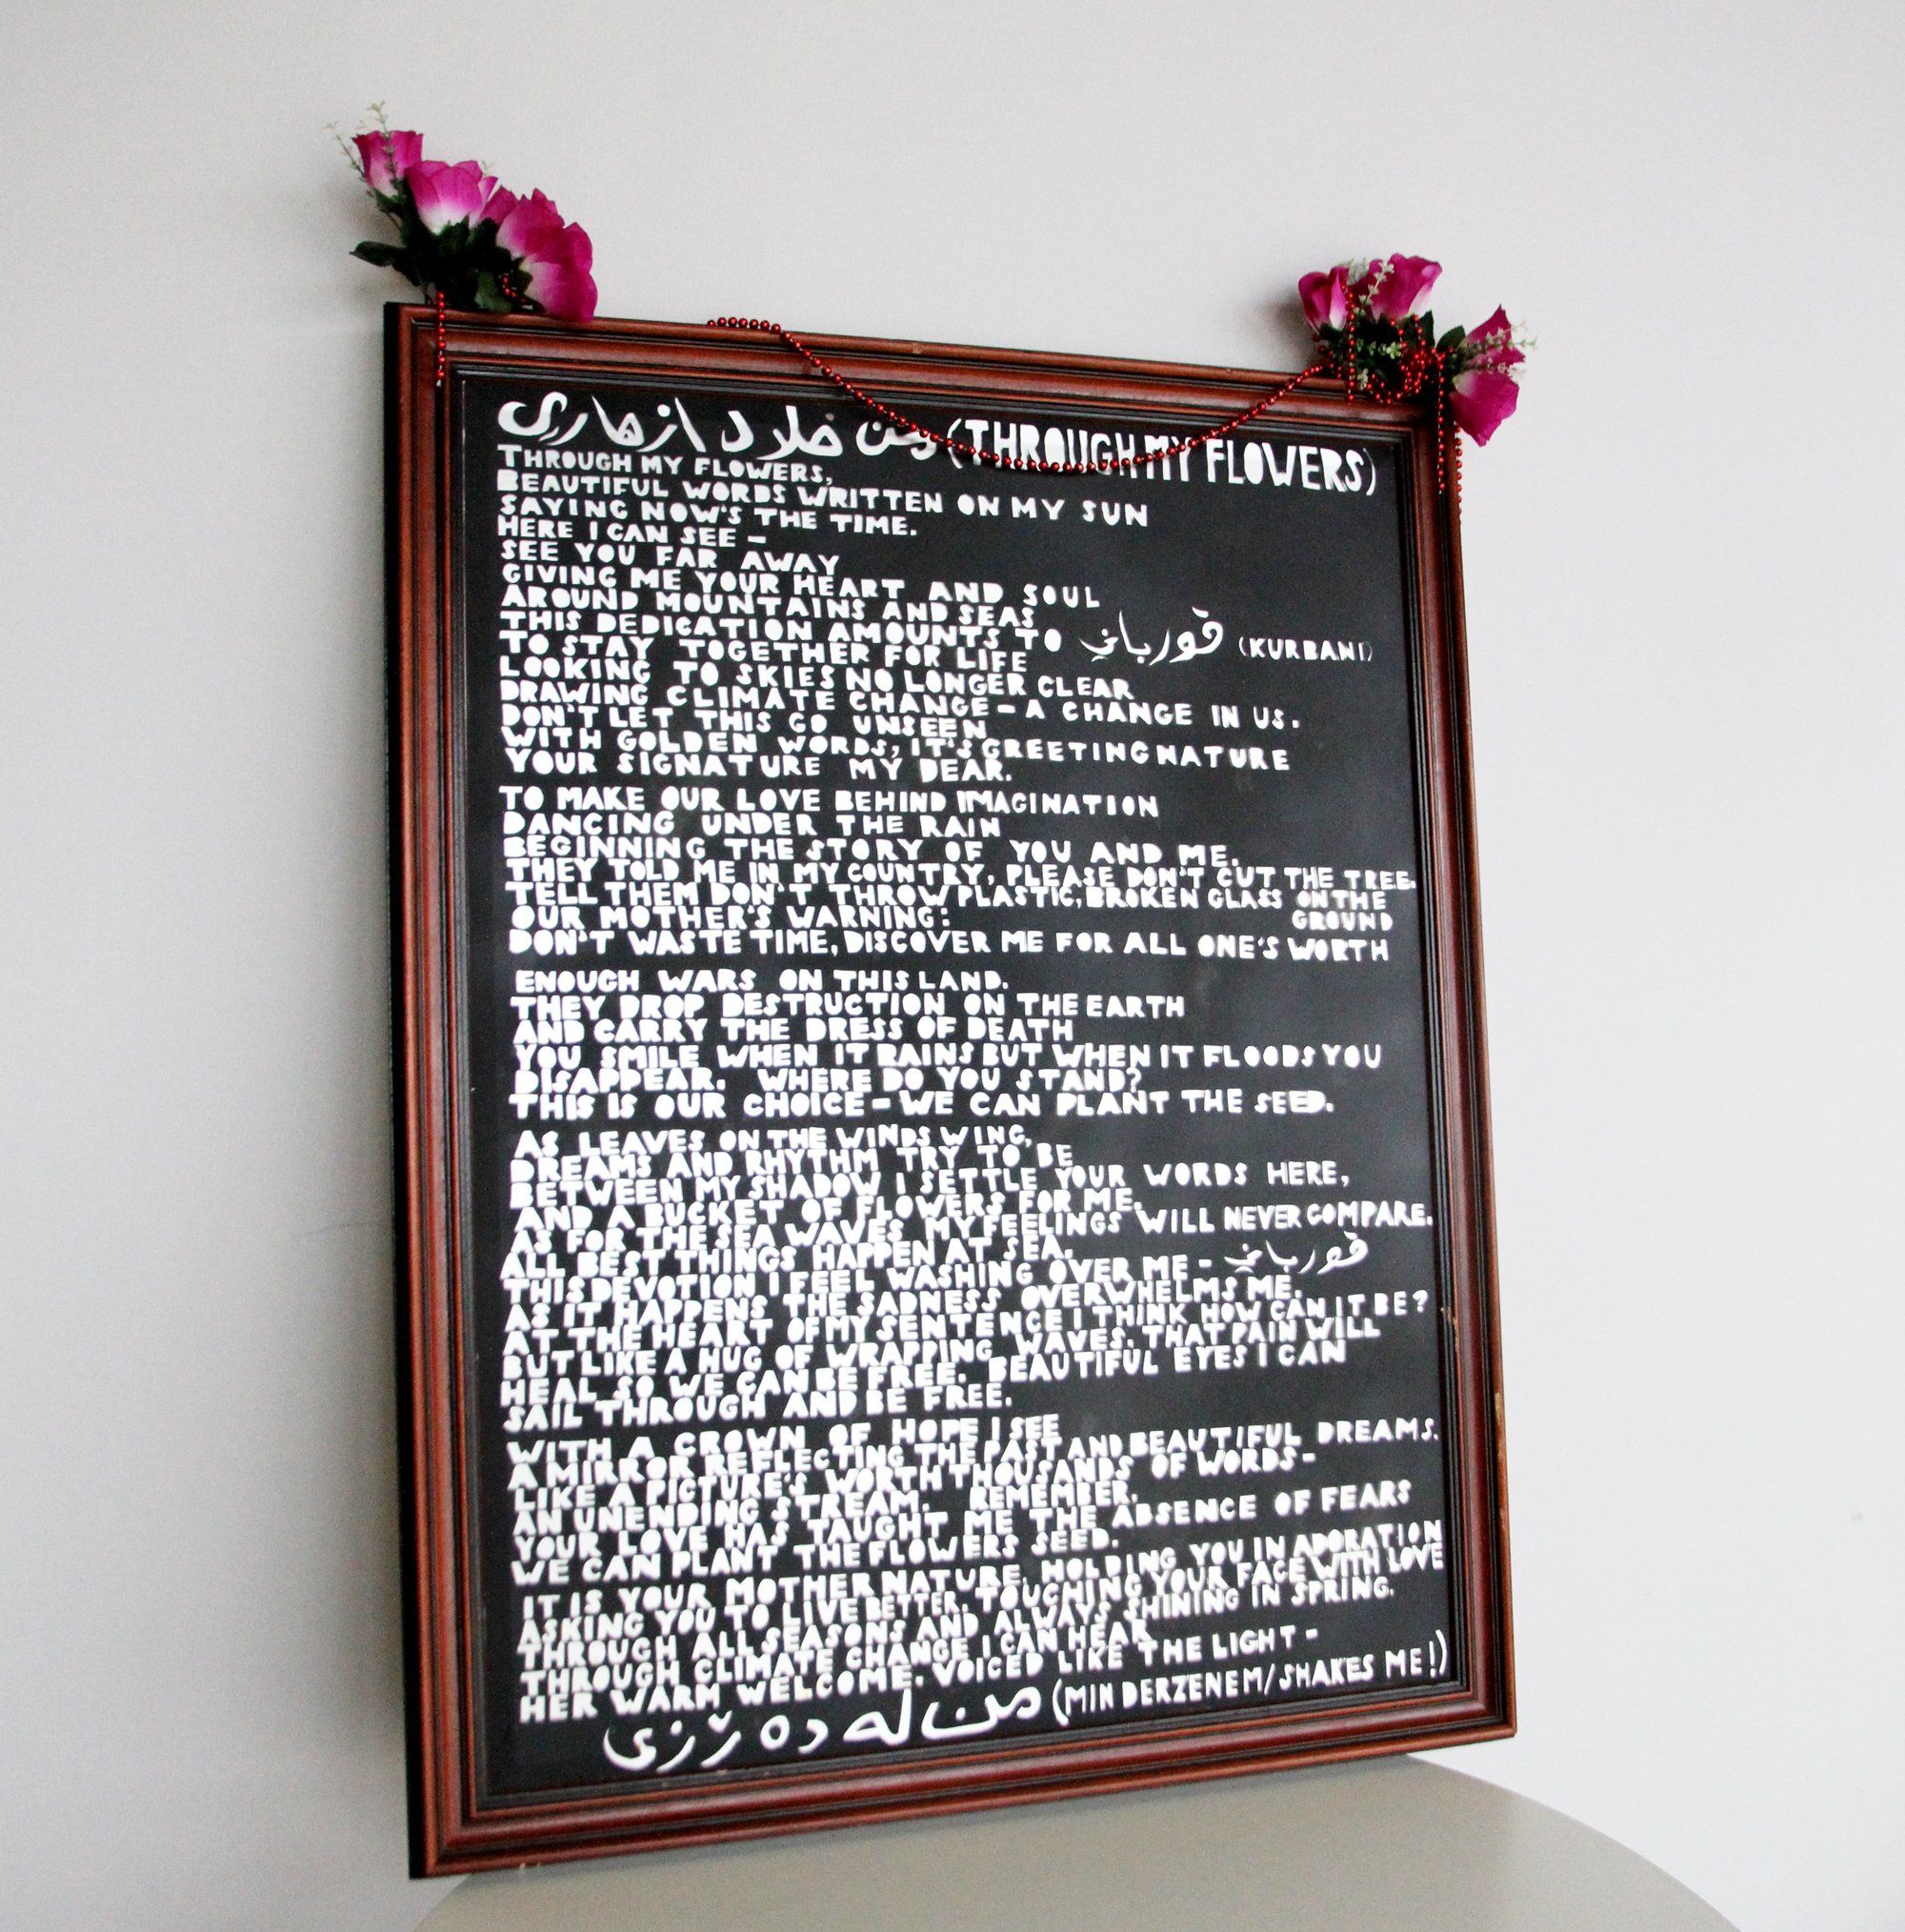 Image of mirror with poem written on it, the frame is wooden and there are red beads and pink flowers at the top.